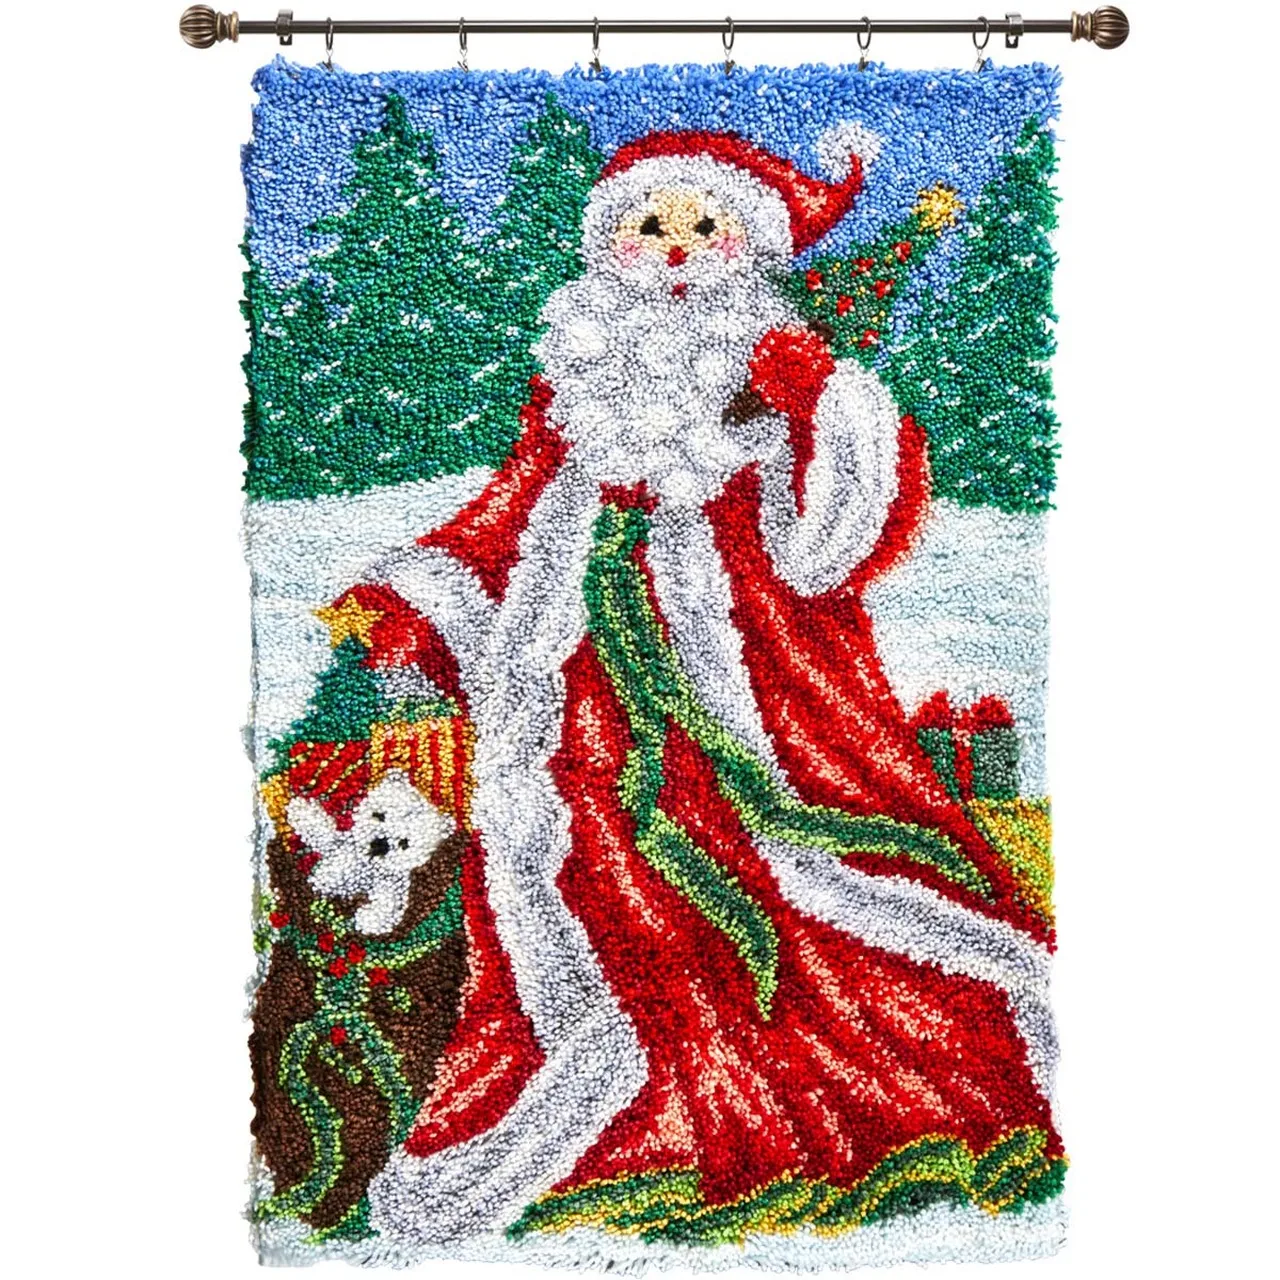 

Latch Hook Rug Father Christmas Wall Tapestry DIY Carpet Rug Pre-Printed Canvas with Non-Skid Backing Floor Mat 69x102cm